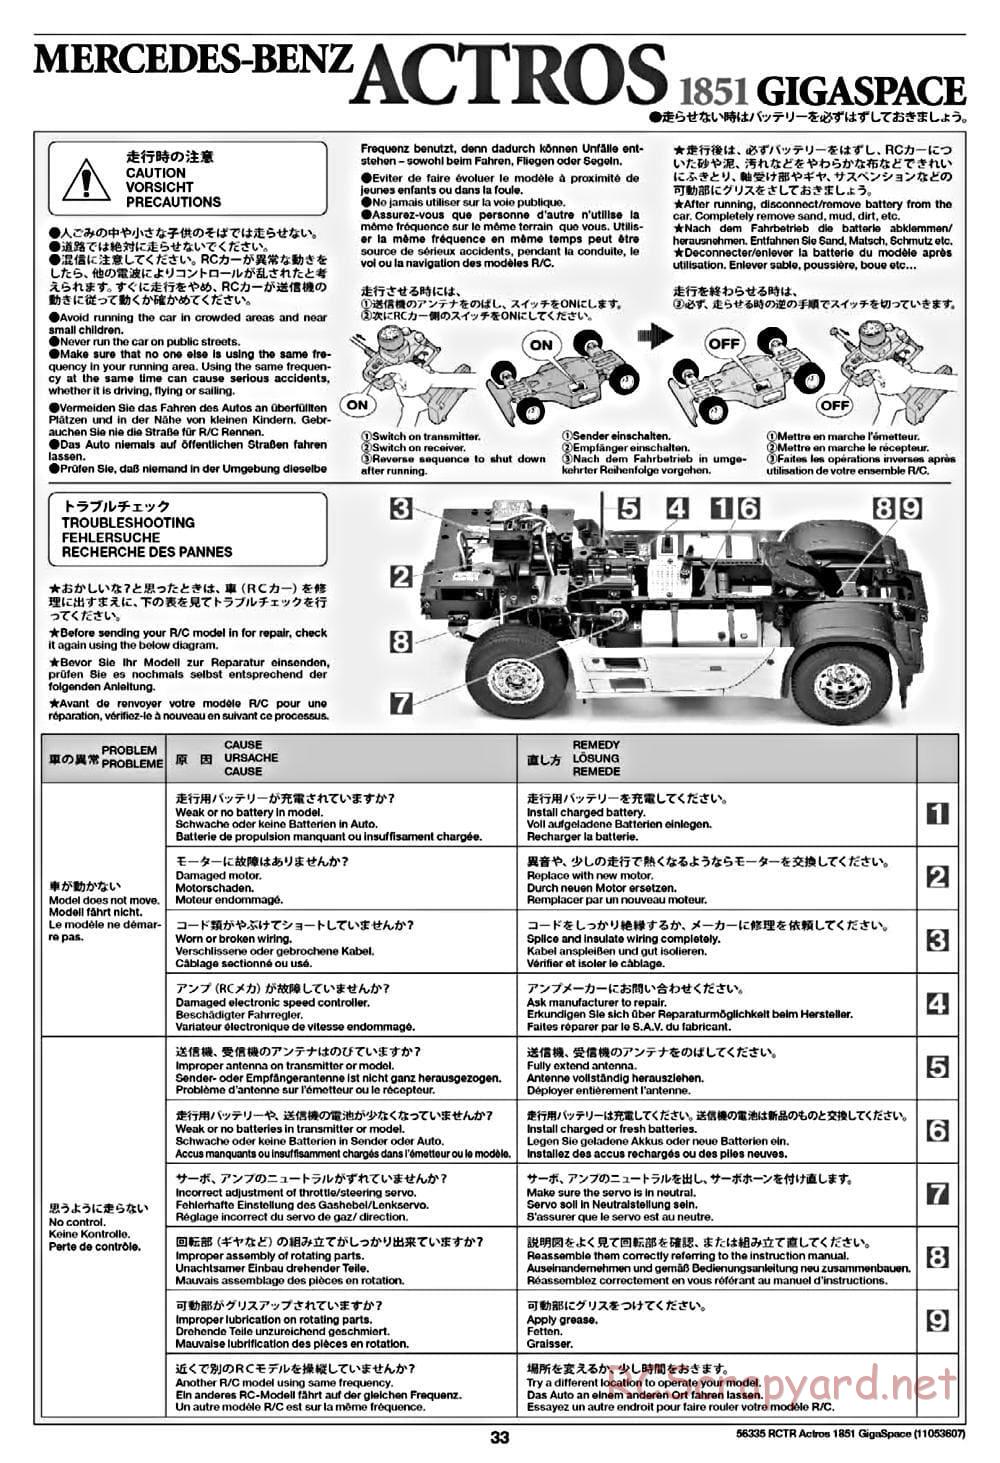 Tamiya - Mercedes-Benz Actros 1851 Gigaspace Tractor Truck Chassis - Manual - Page 33